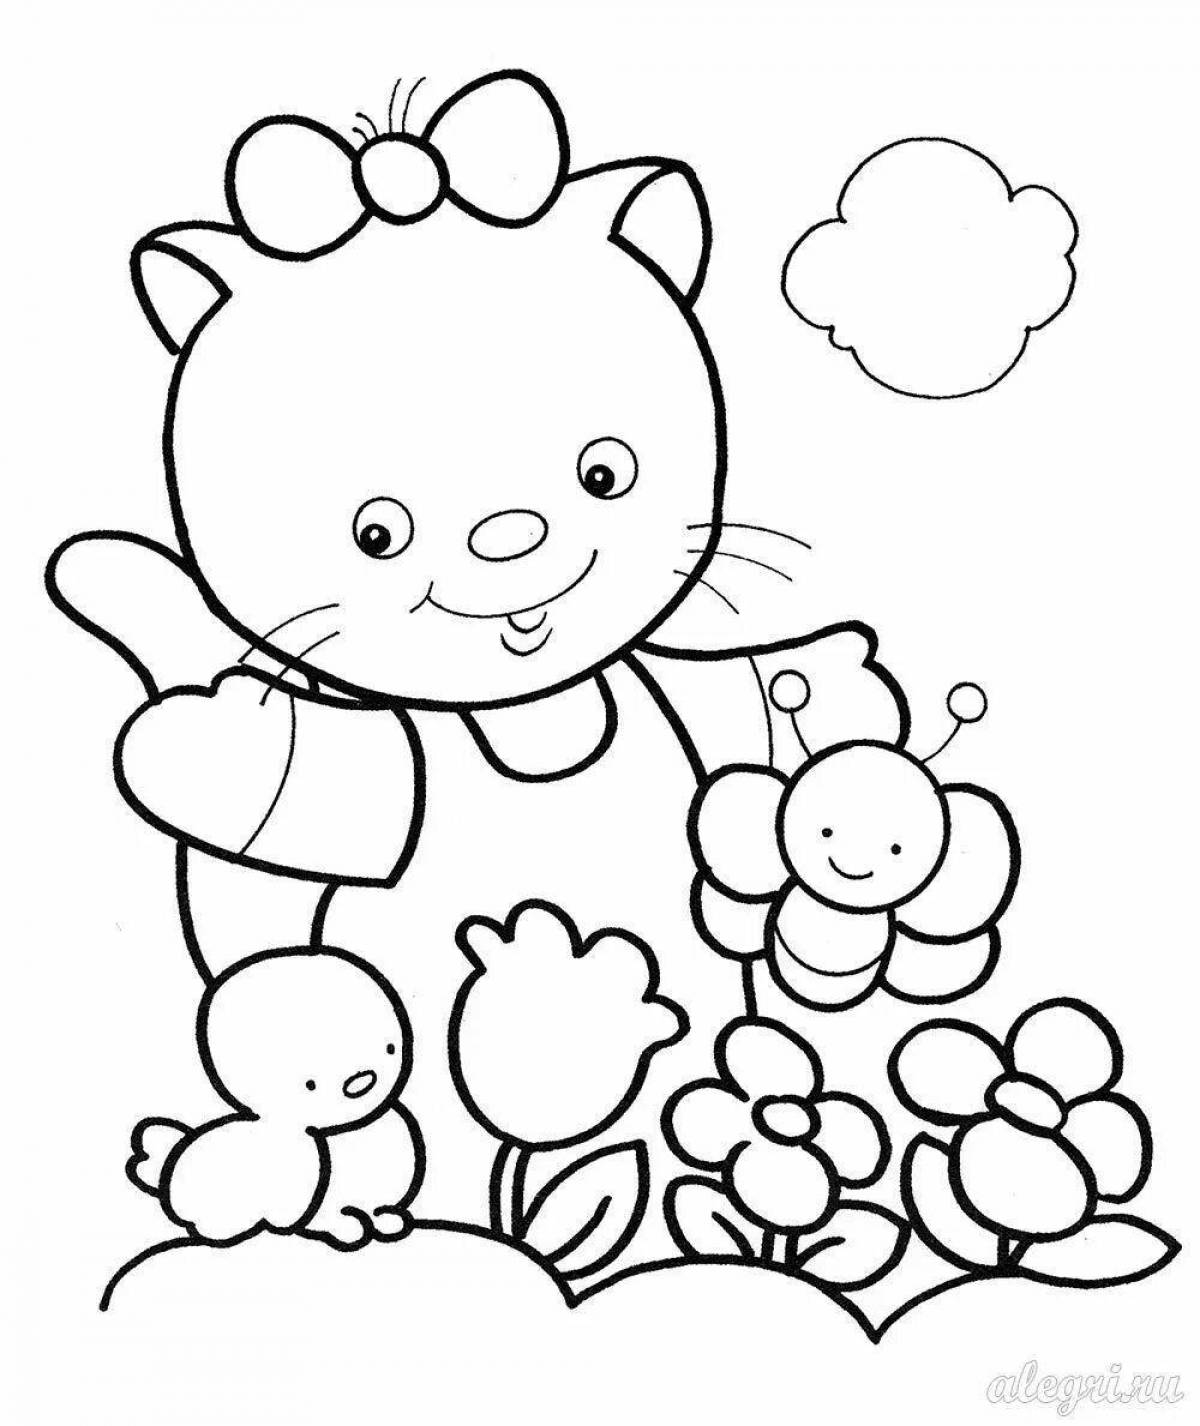 Glitter coloring book for little girls 3 years old